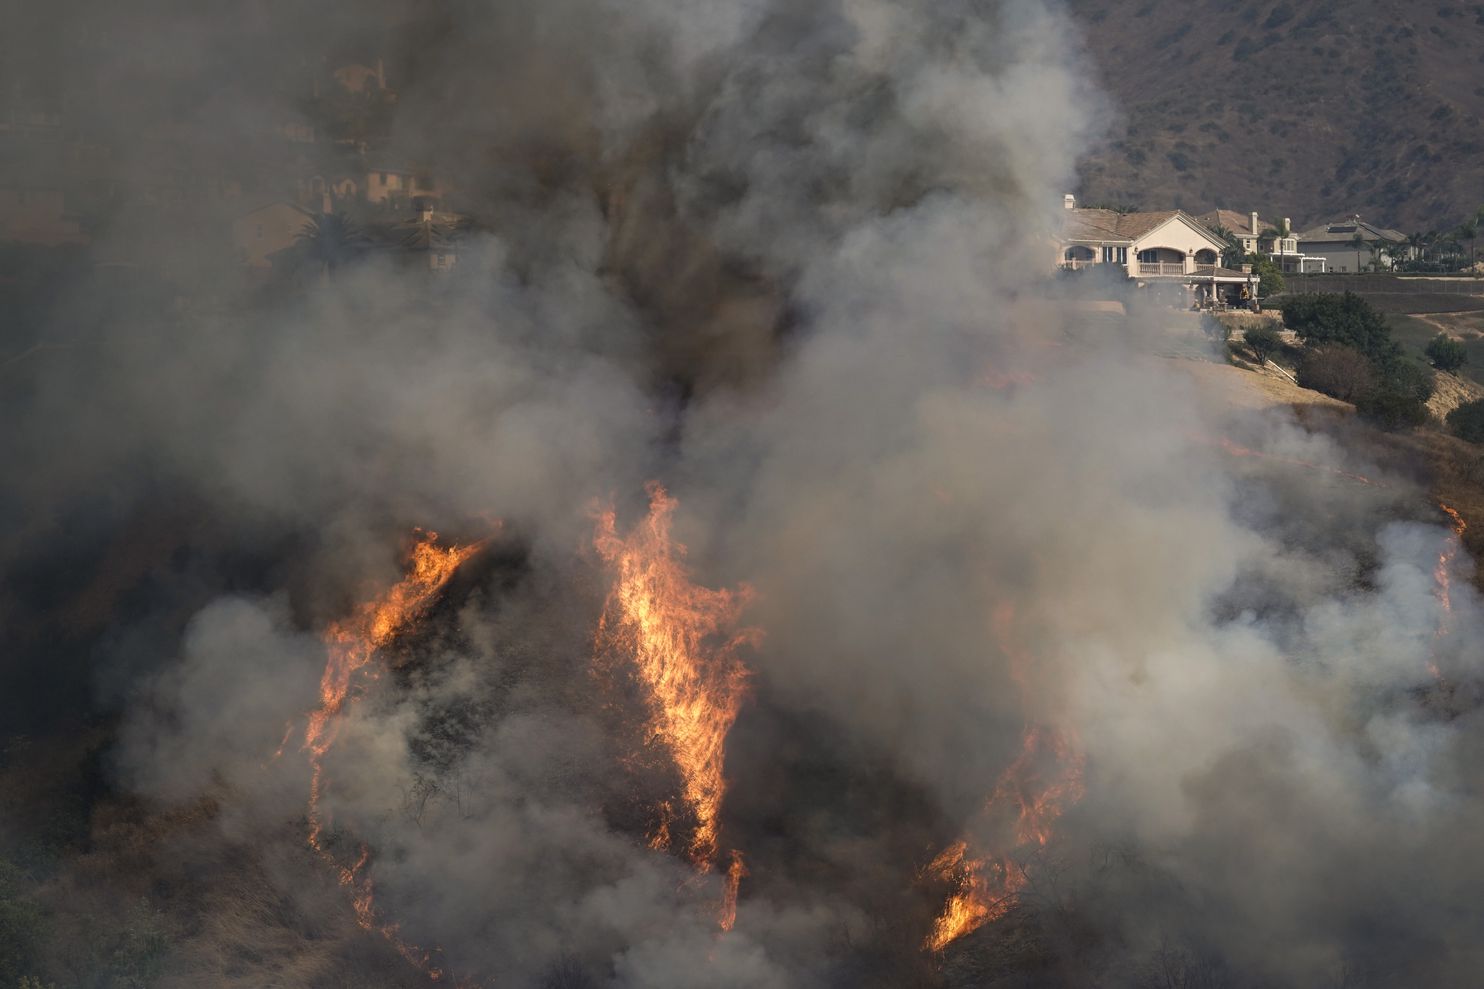 Santa Ana winds howl from Los Angeles County to San Diego, escalating fire risk